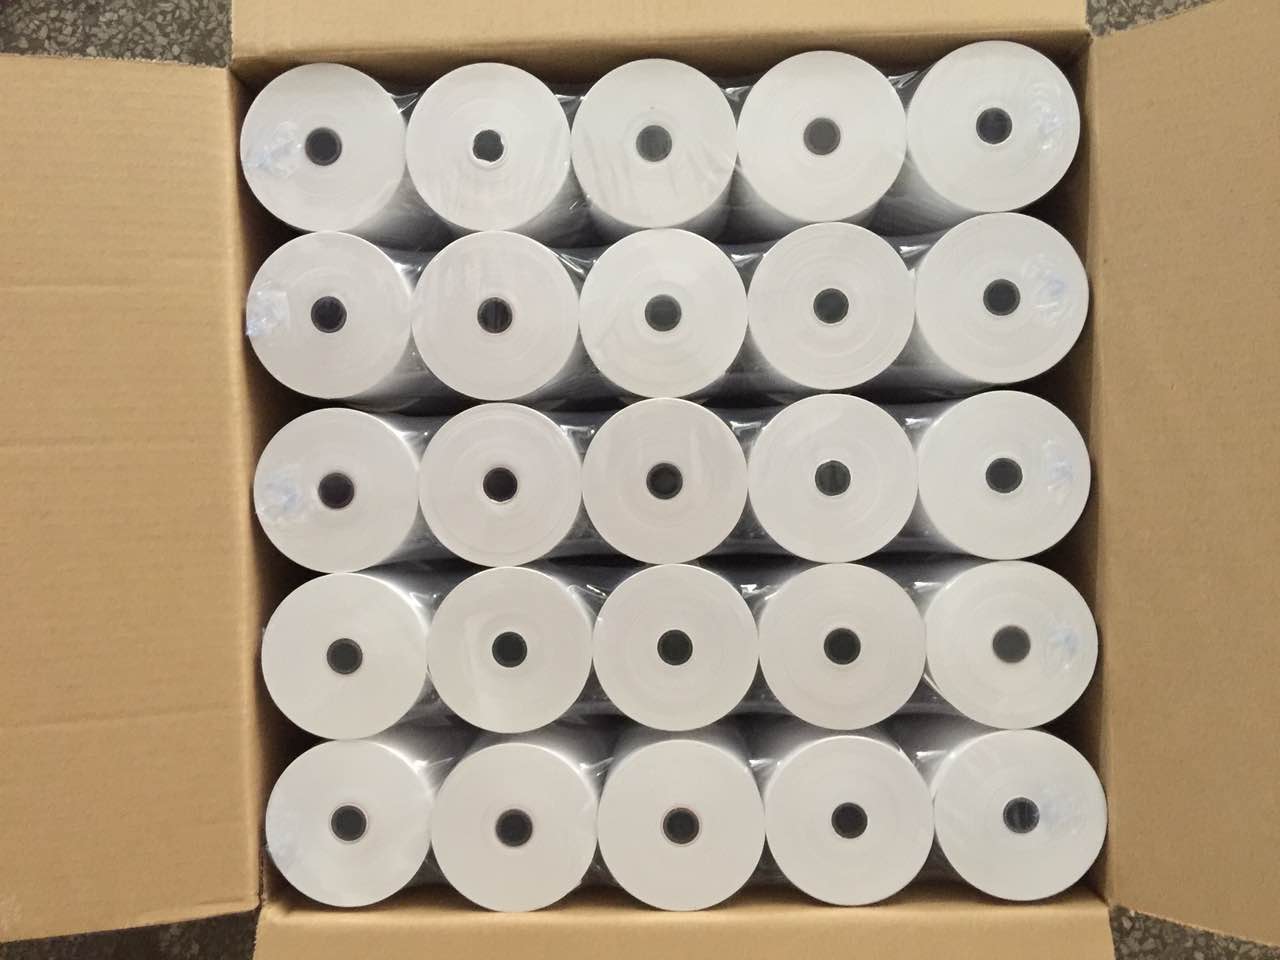 Thermal Roll for POS Printers  80mm x 80 meters with 1/2" core